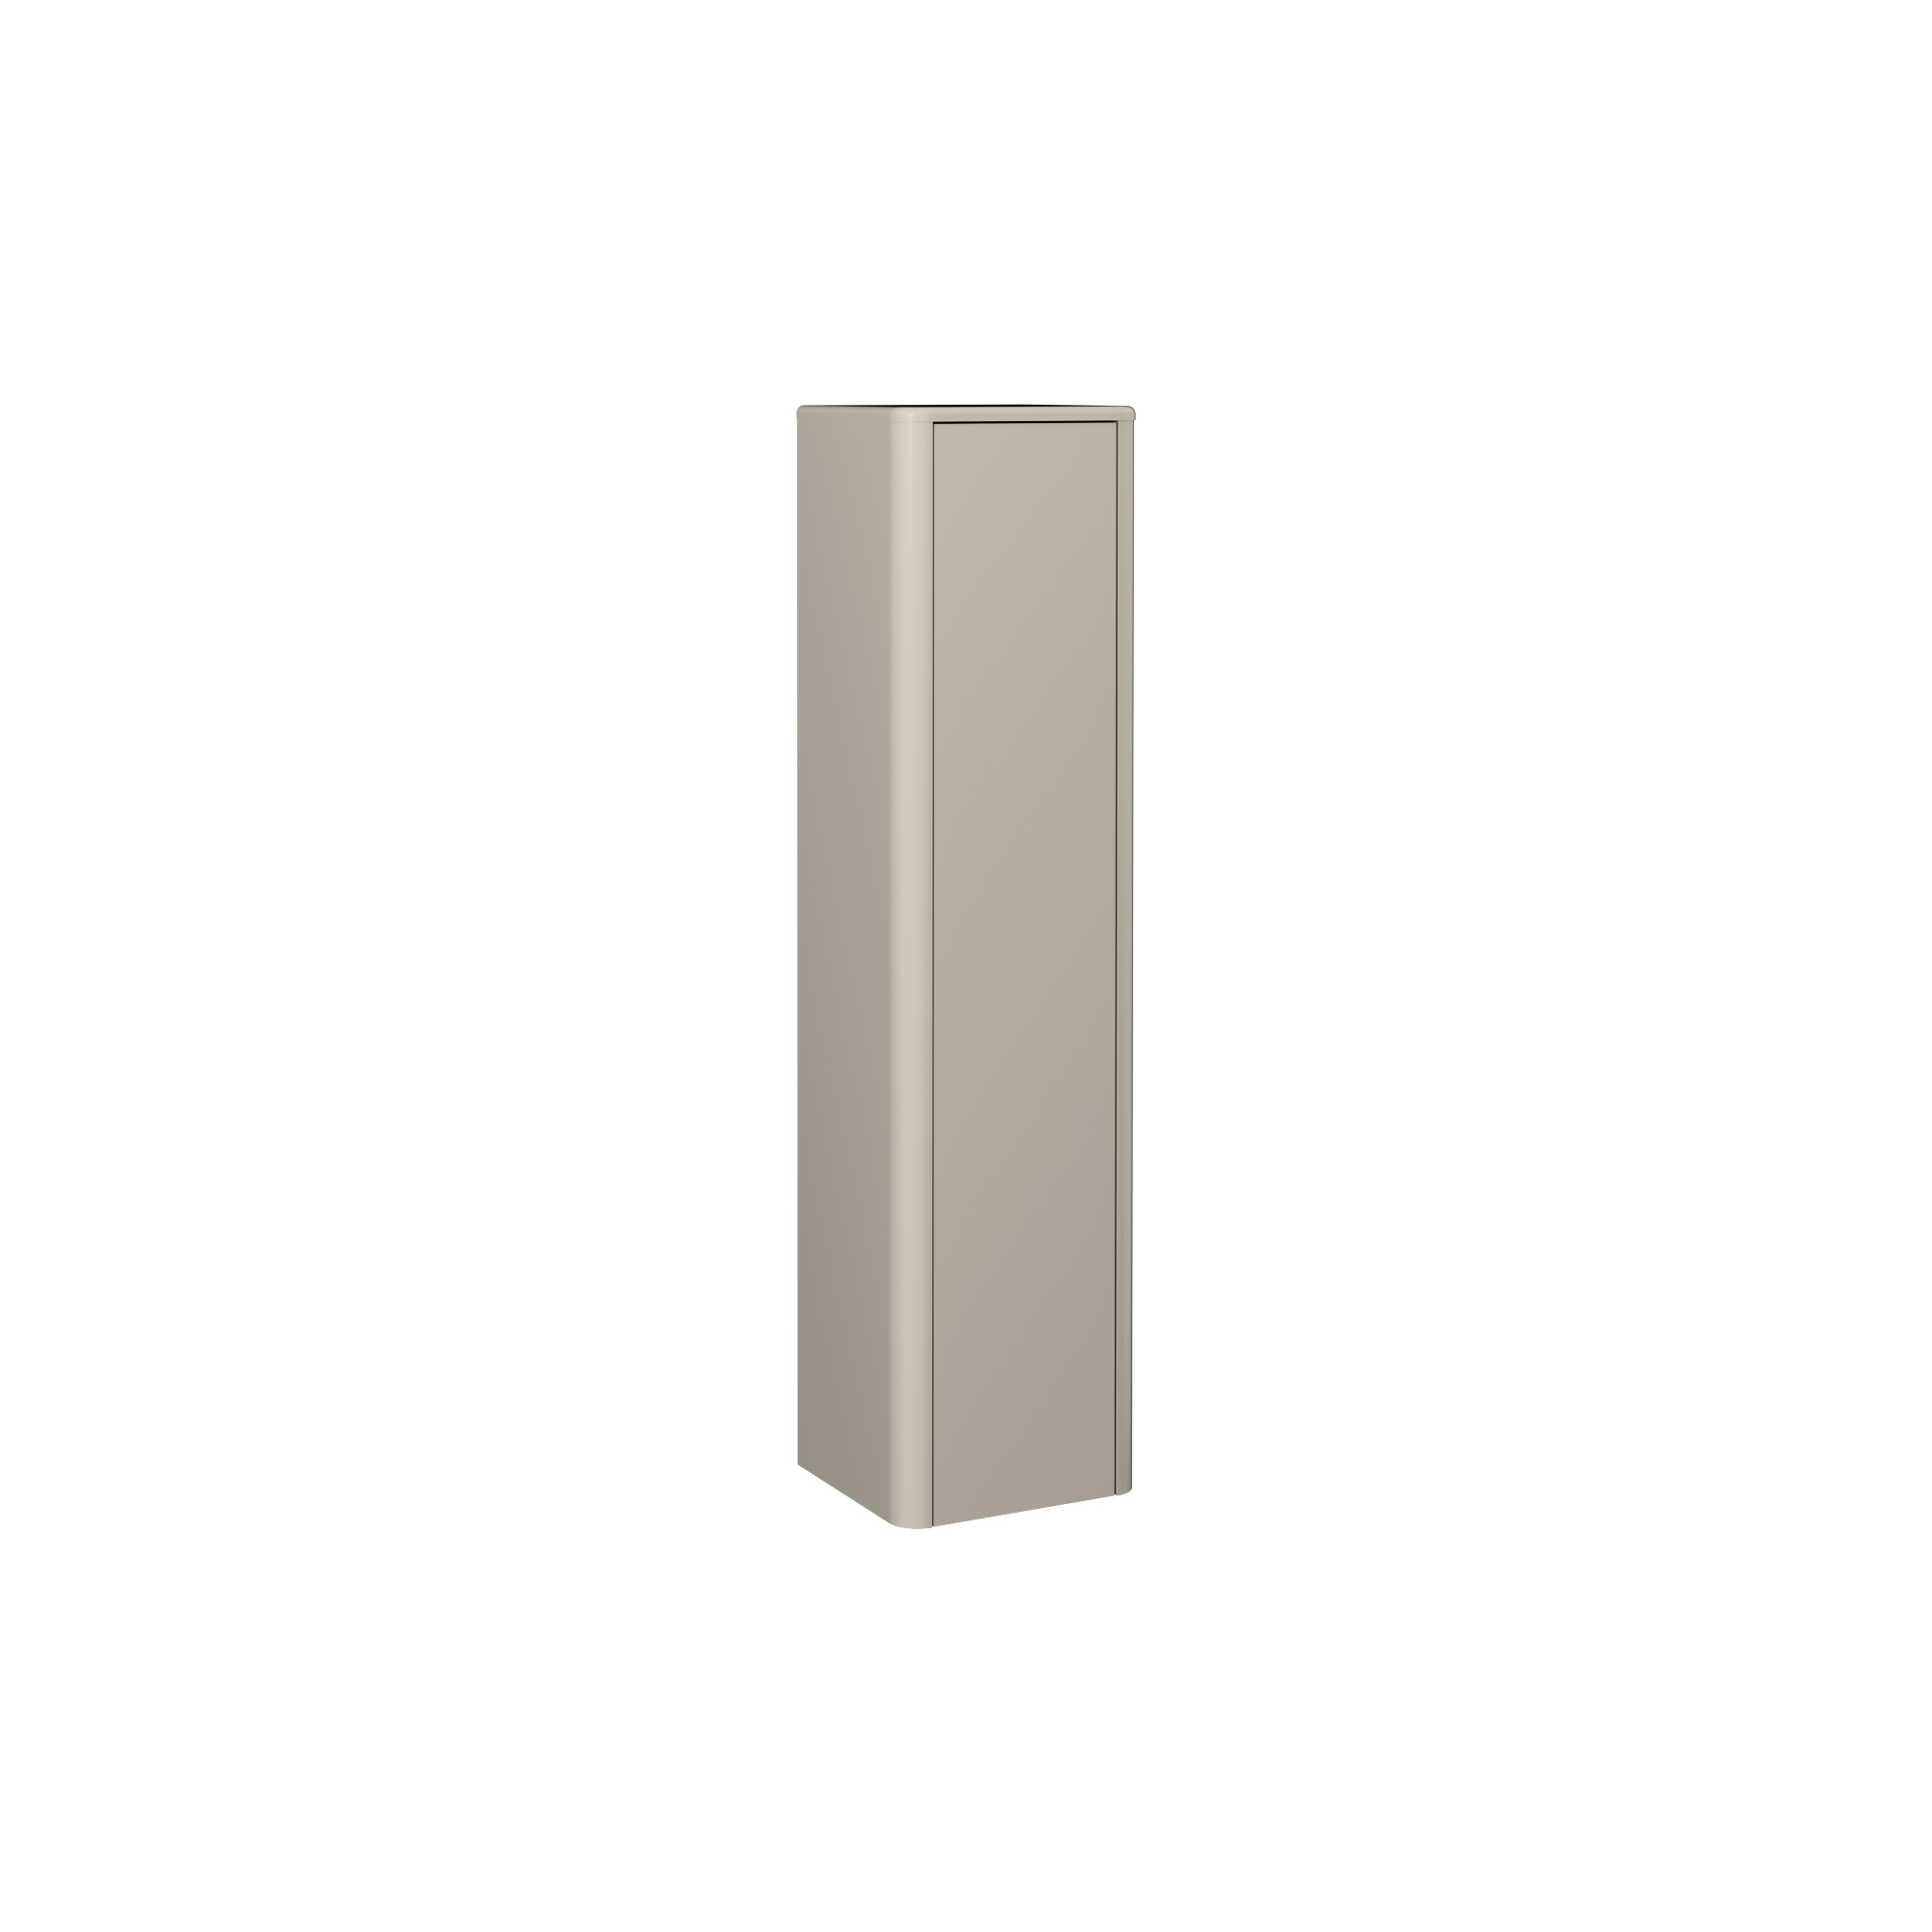 Sogno 16"  Tall Cabinet, Sand Beige Left